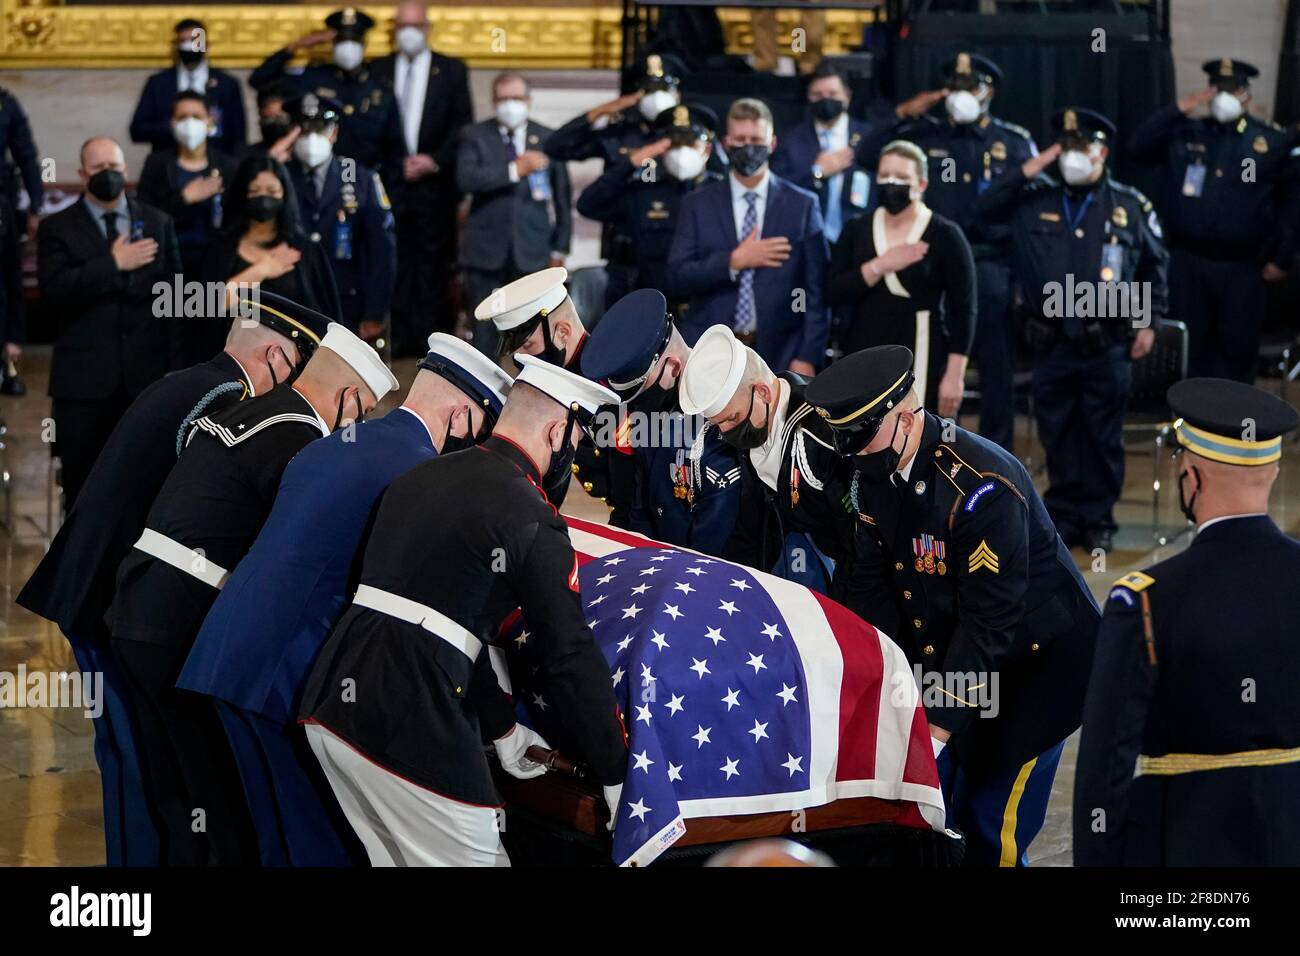 Washington, DC, USA. 13th Apr, 2021. The remains of the late U.S. Capitol Police officer William 'Billy' Evans arrive for a memorial service as he lies in honor in the Rotunda at the U.S. Capitol on April 13, 2021 in Washington, DC. Officer Evans was killed in the line of duty during the attack outside the U.S. Capitol on April 2. He is the sixth Capitol Police officer to die in the line of duty in the nearly 200 years since the force was created. Credit: Drew Angerer/Pool Via Cnp/Media Punch/Alamy Live News Stock Photo